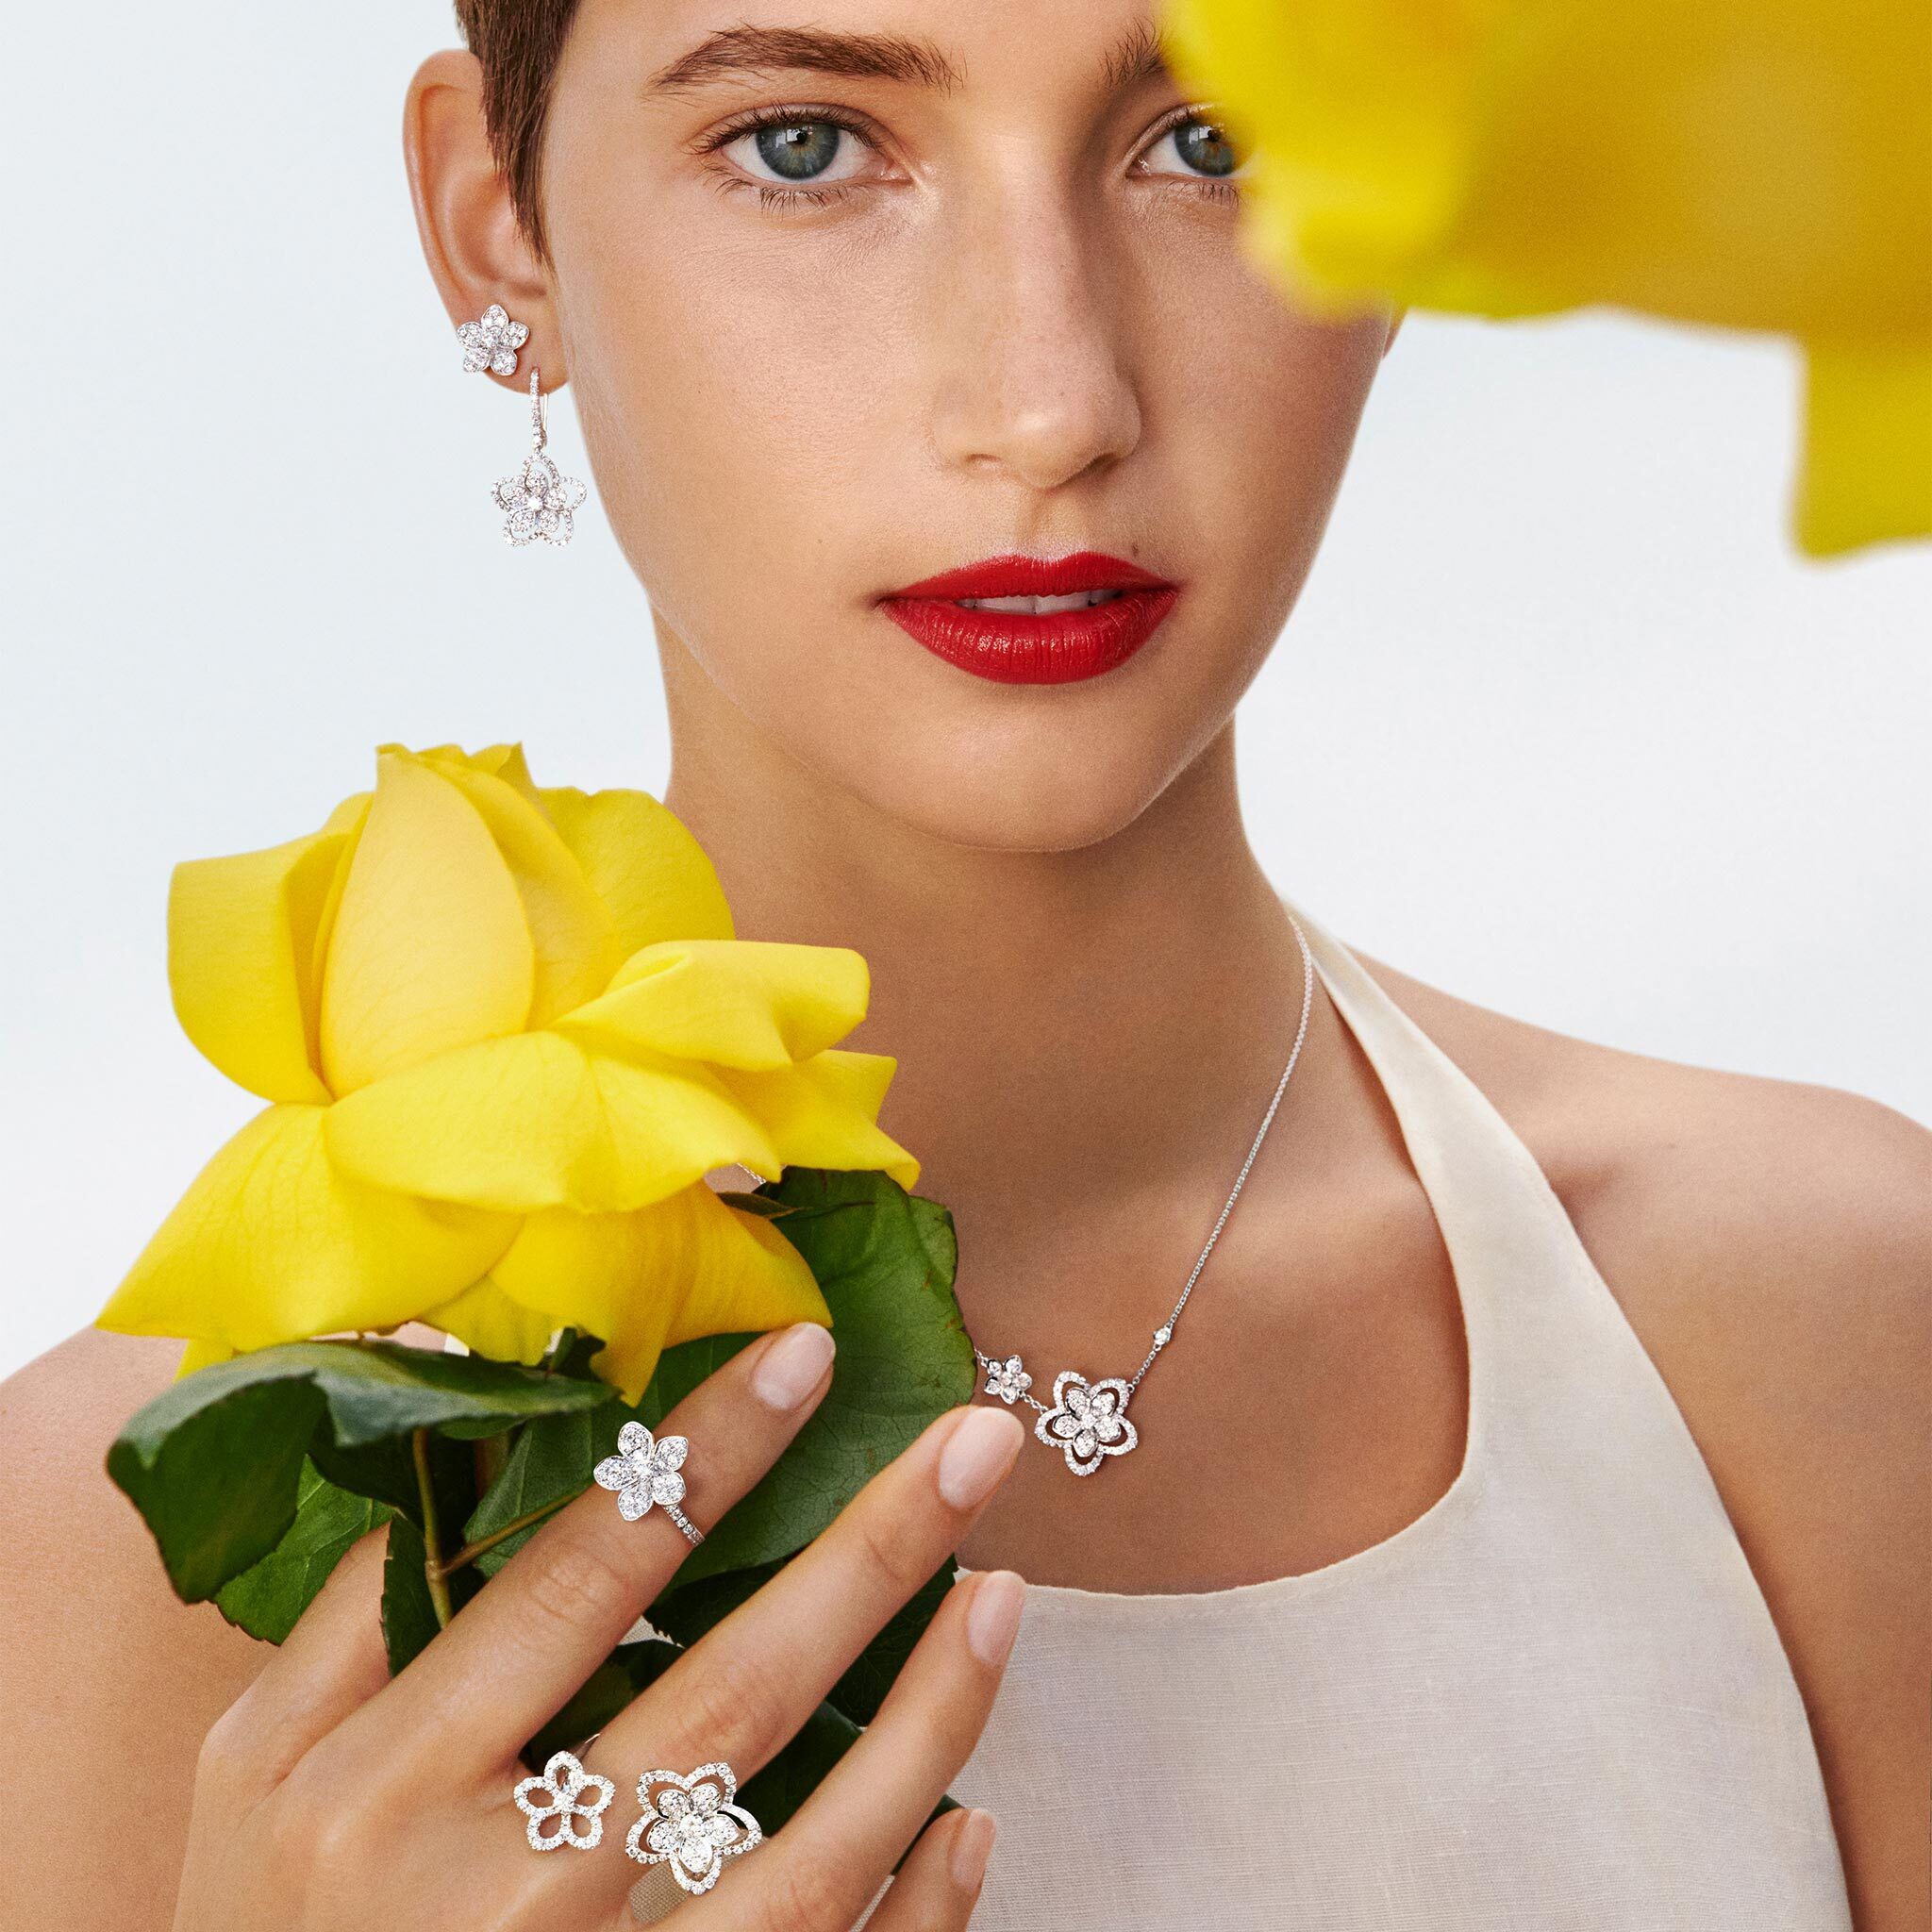 Model wearing earrings, pendant and ring from the Butterfly Silhouette Collection